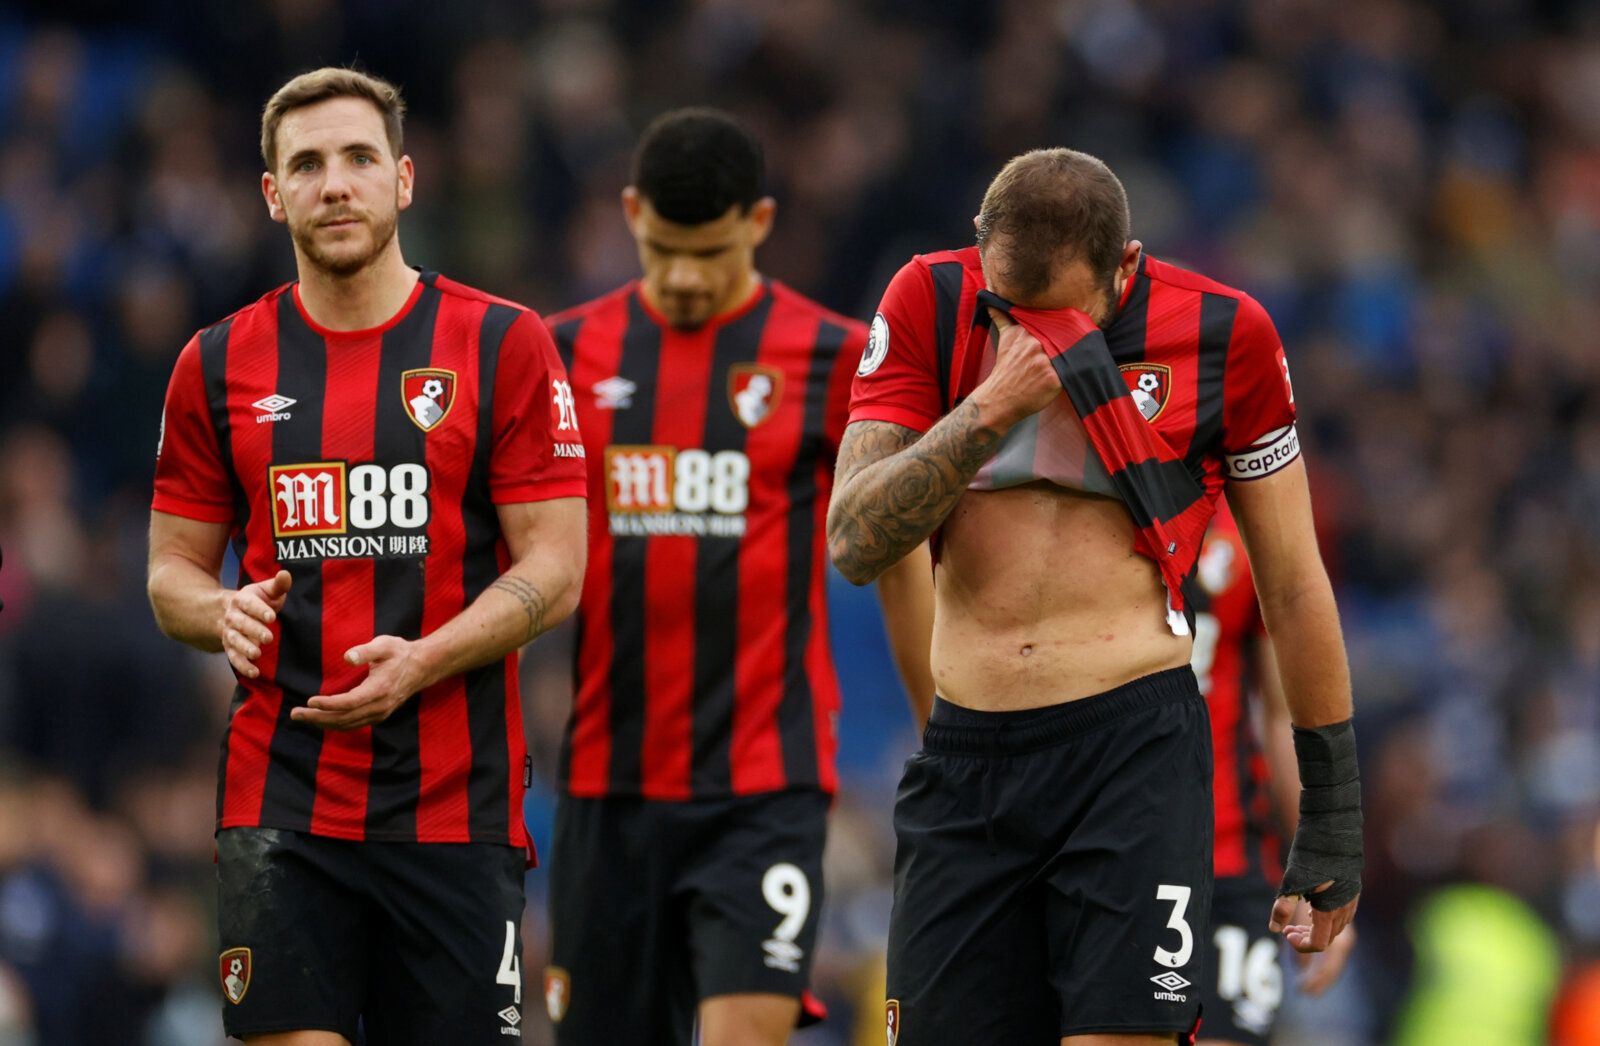 Soccer Football - Premier League - Brighton &amp; Hove Albion v AFC Bournemouth - The American Express Community Stadium, Brighton, Britain - December 28, 2019  Bournemouth's Steve Cook and Dan Gosling react after the match         Action Images via Reuters/John Sibley  EDITORIAL USE ONLY. No use with unauthorized audio, video, data, fixture lists, club/league logos or 